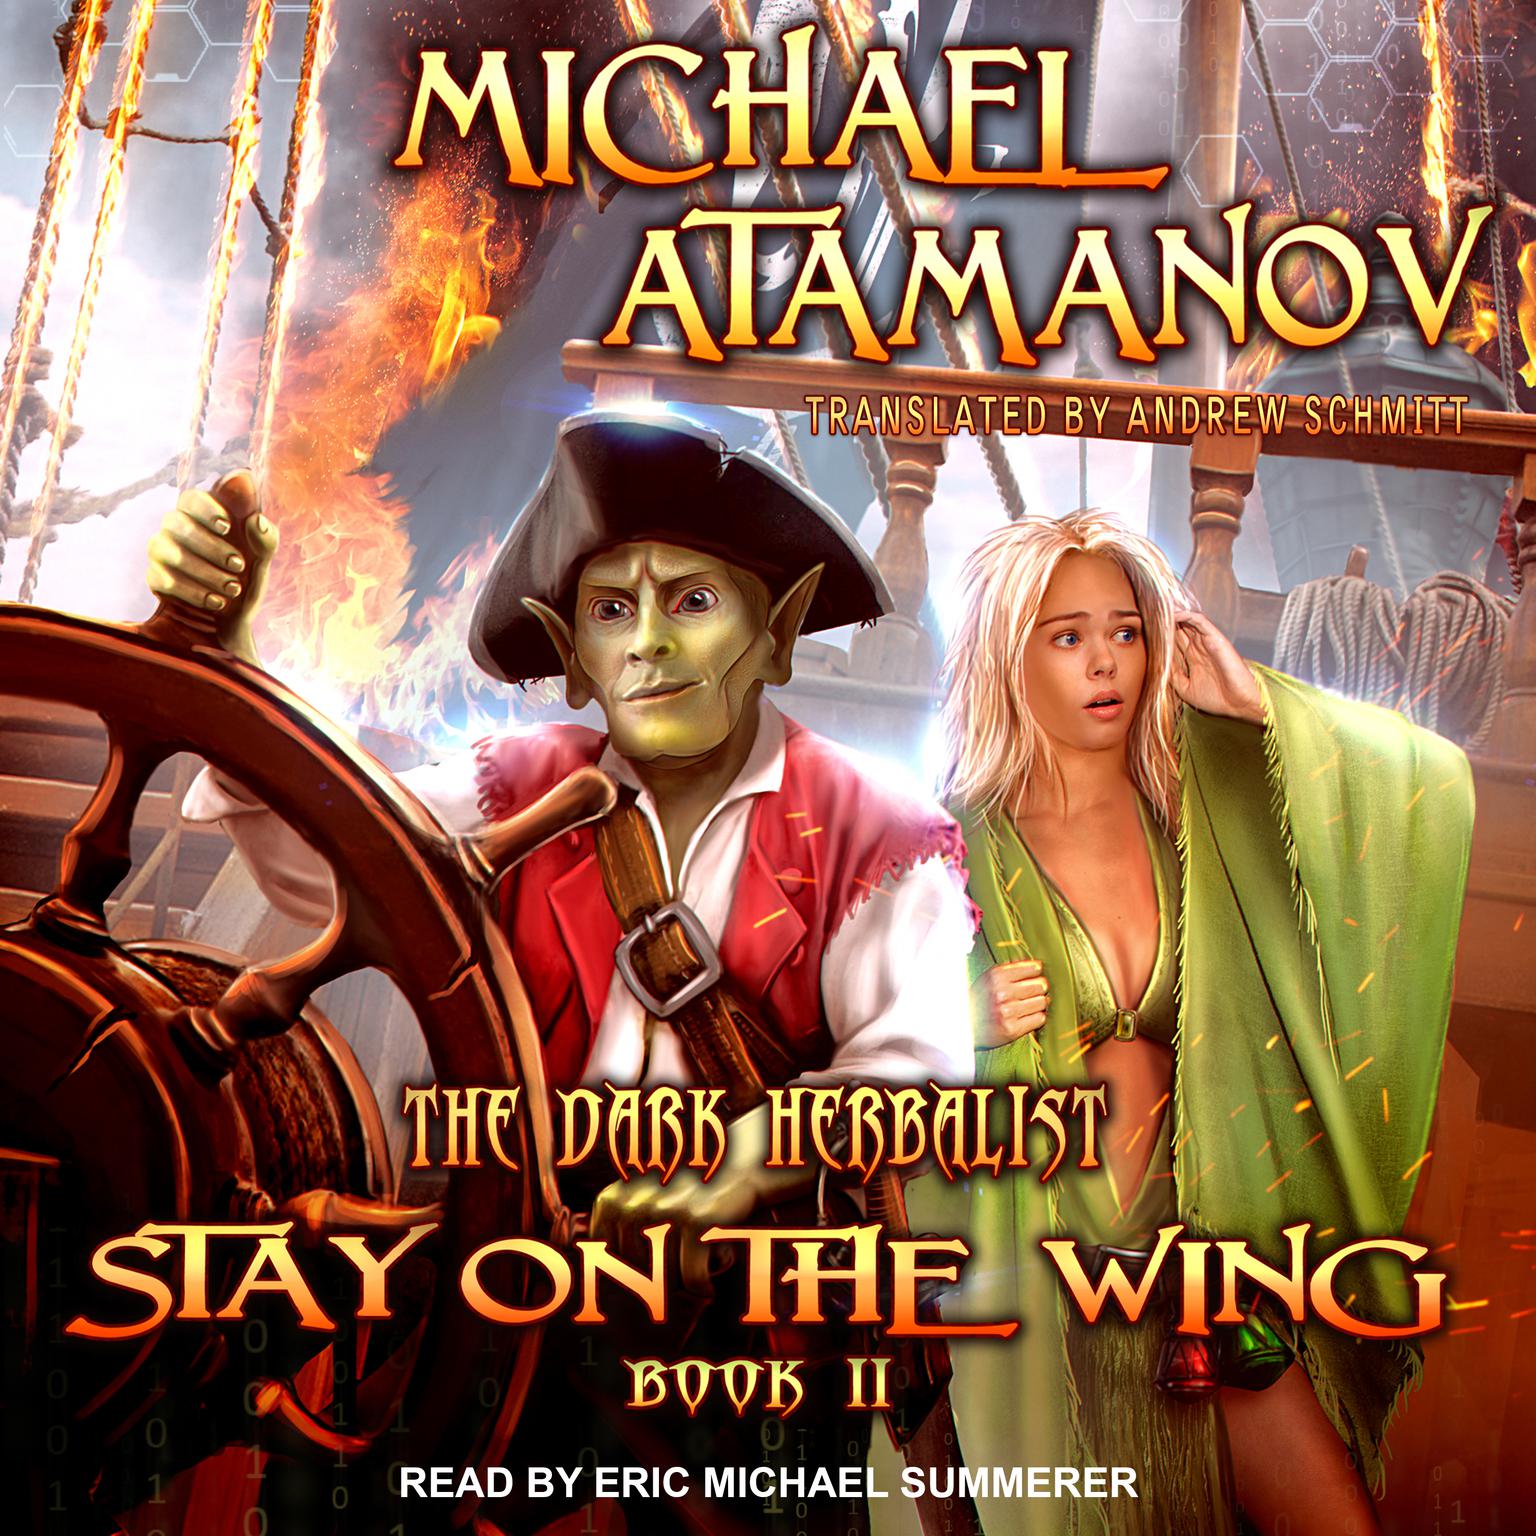 Stay on the Wing Audiobook, by Michael Atamanov